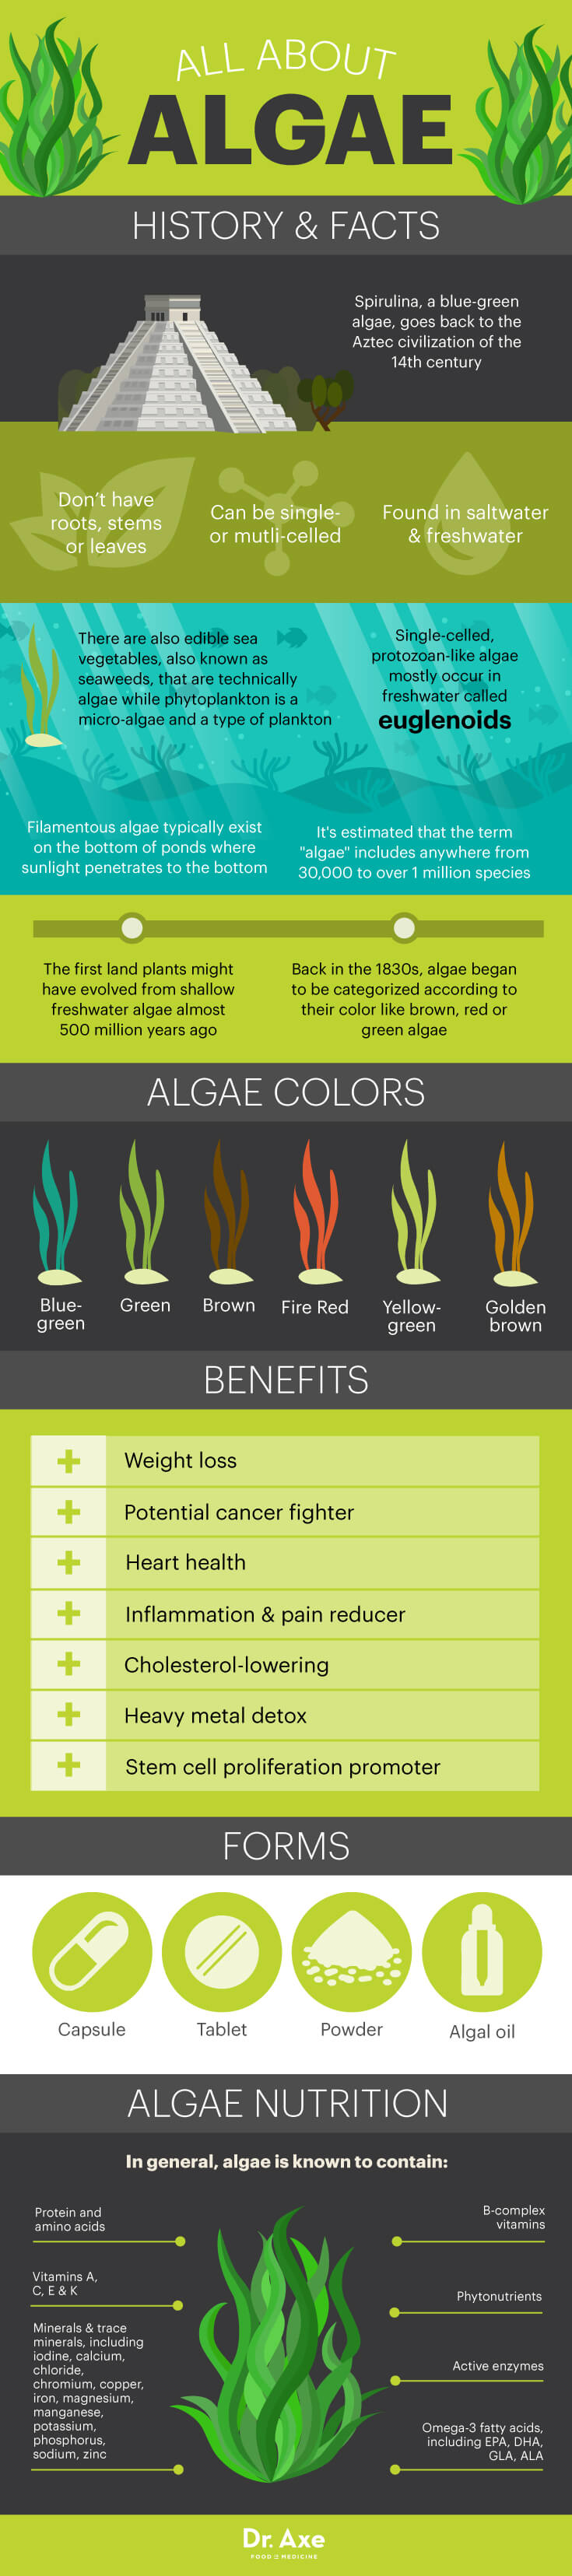 All About Algae: Superfood Facts And Health Benefits Infographic